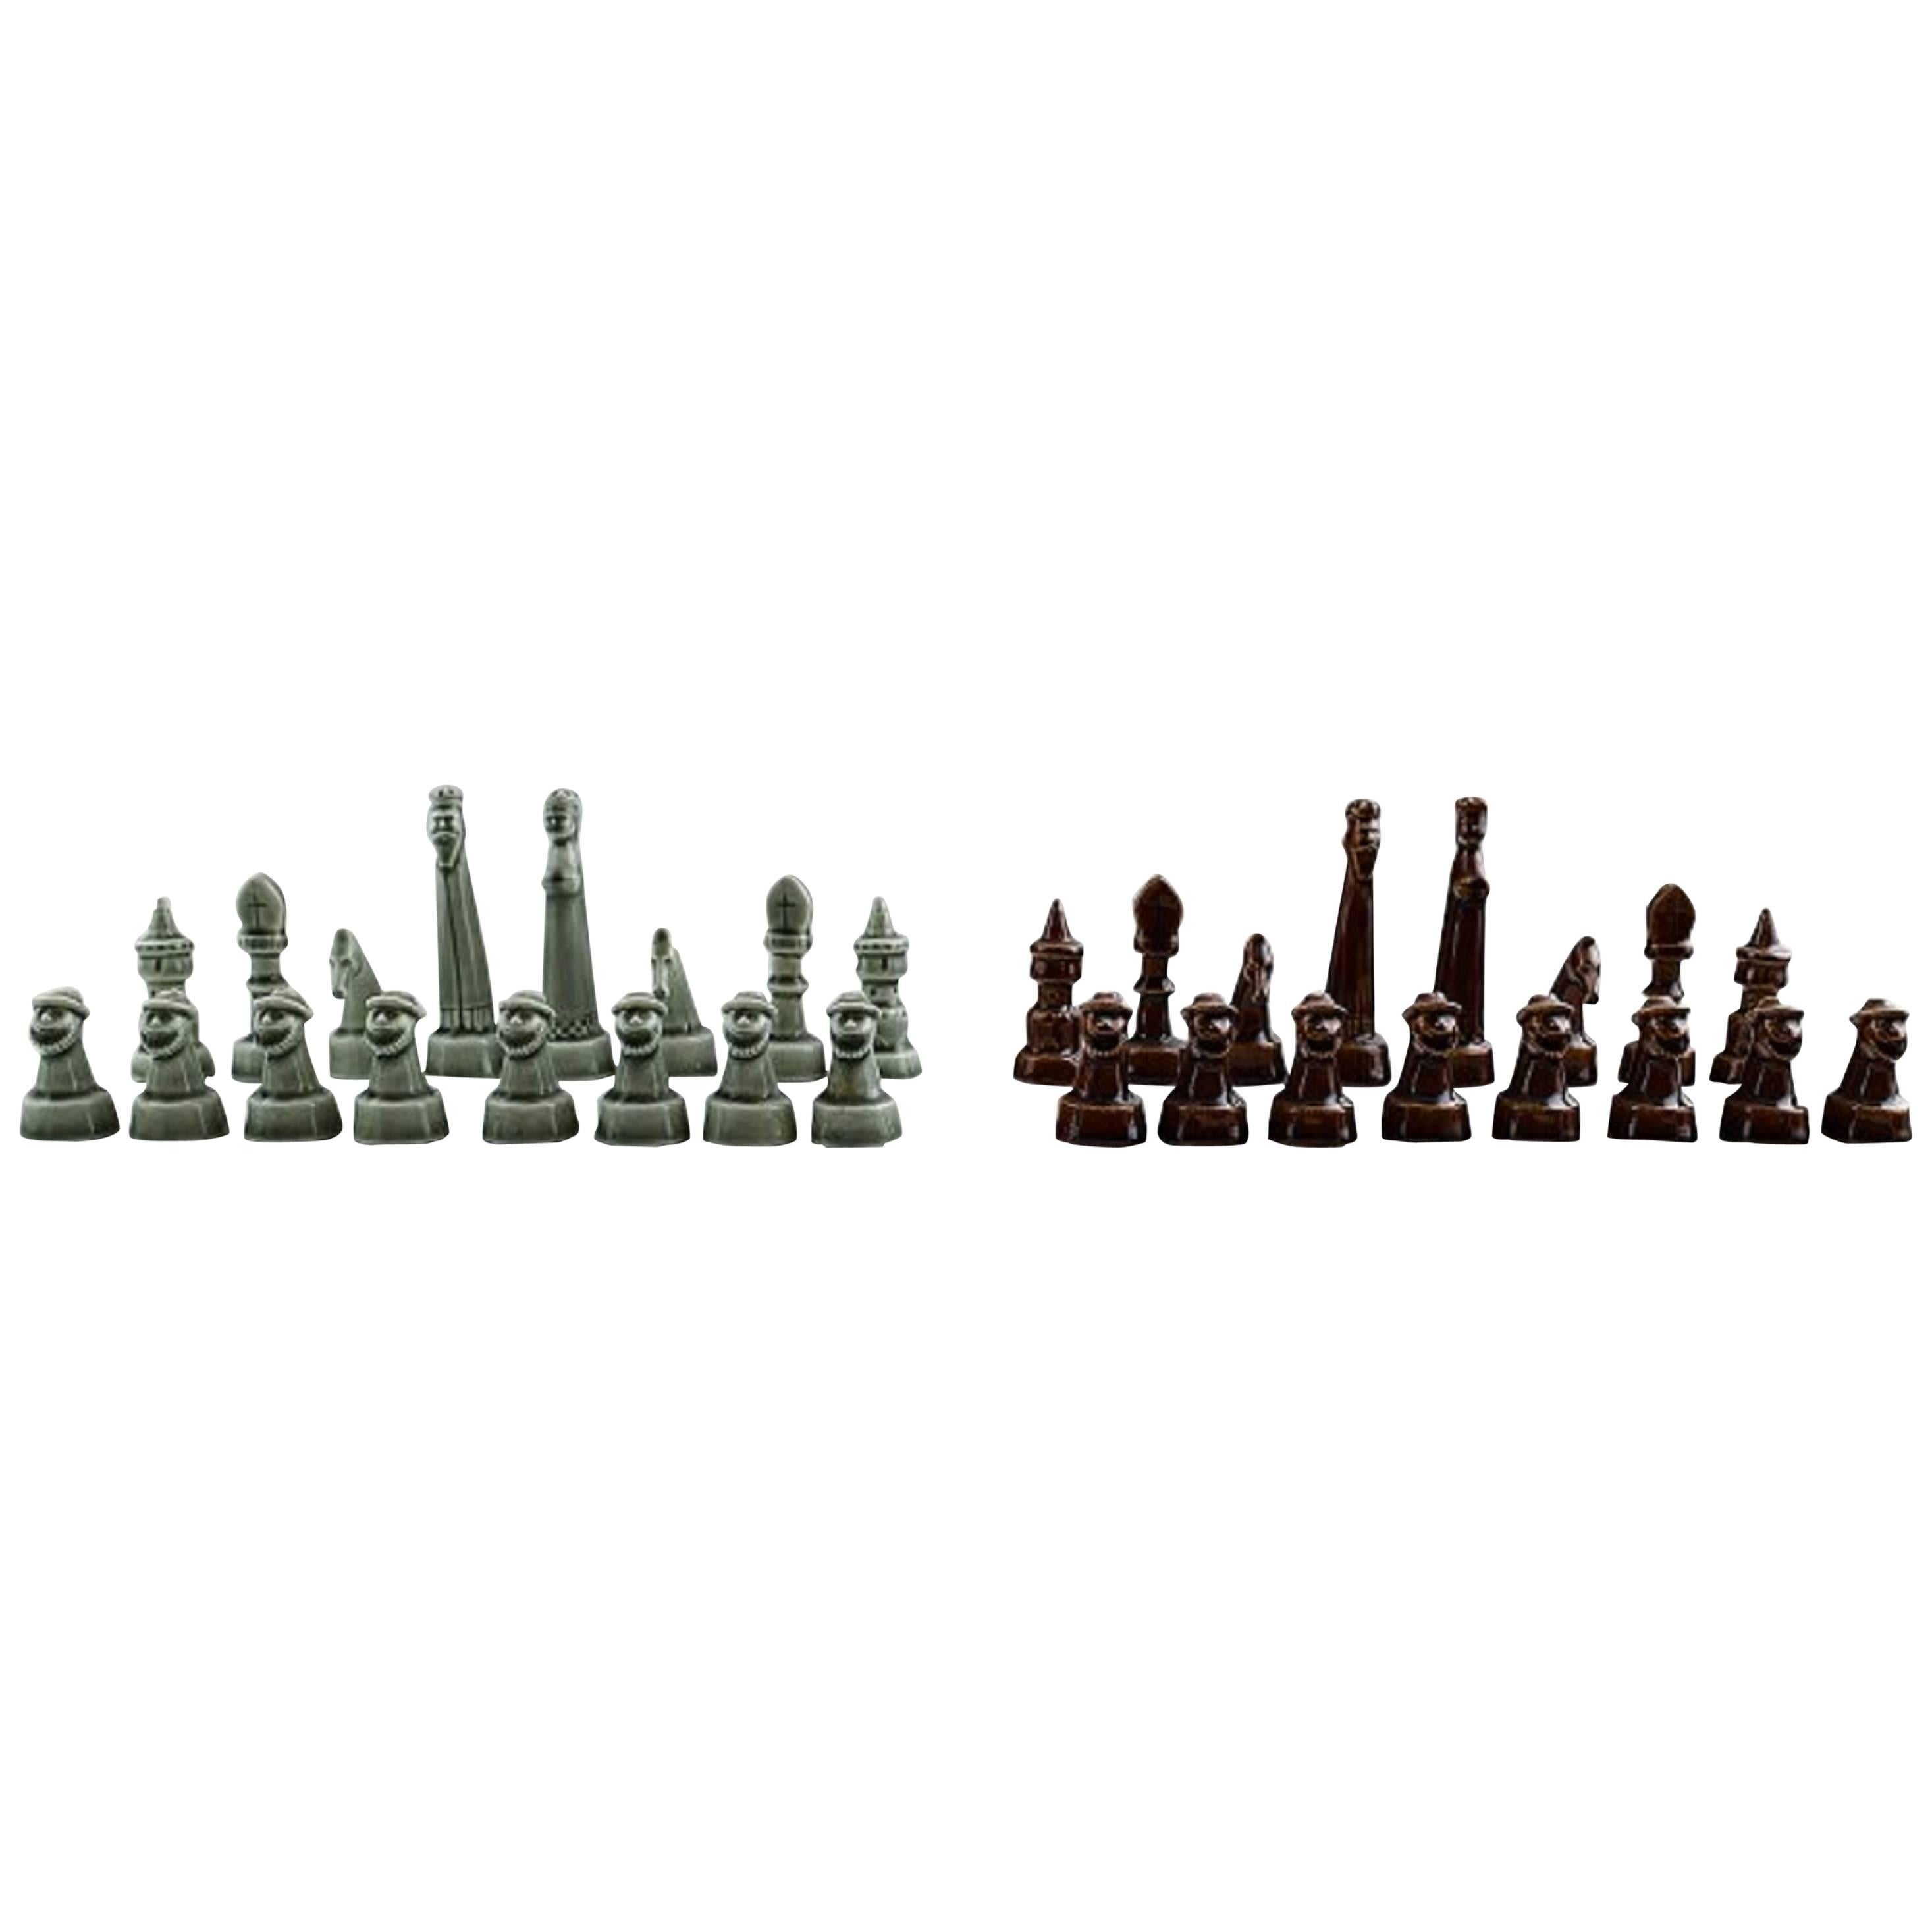 Sven Wejsfelt for Gustavsberg, Complete Set of Chess Pieces in Ceramics